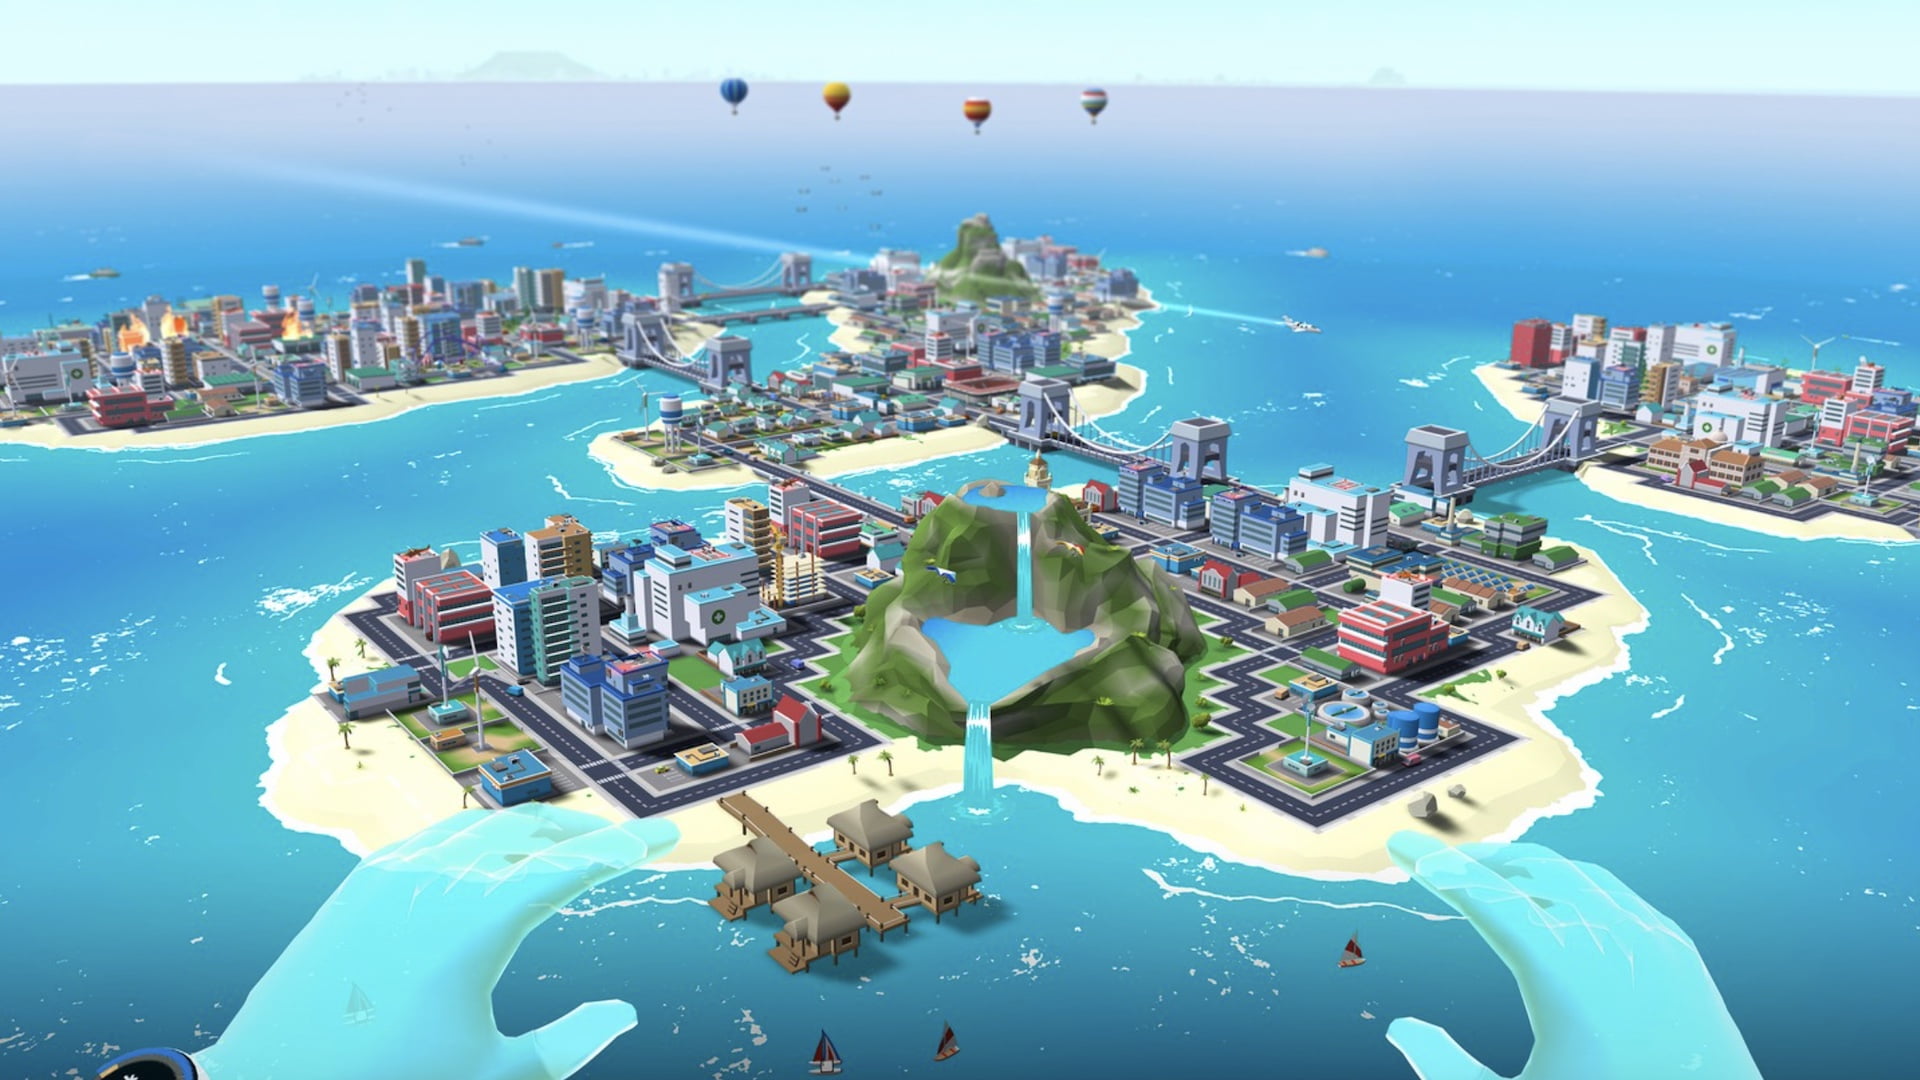 The player hovers above a densely populated island city.